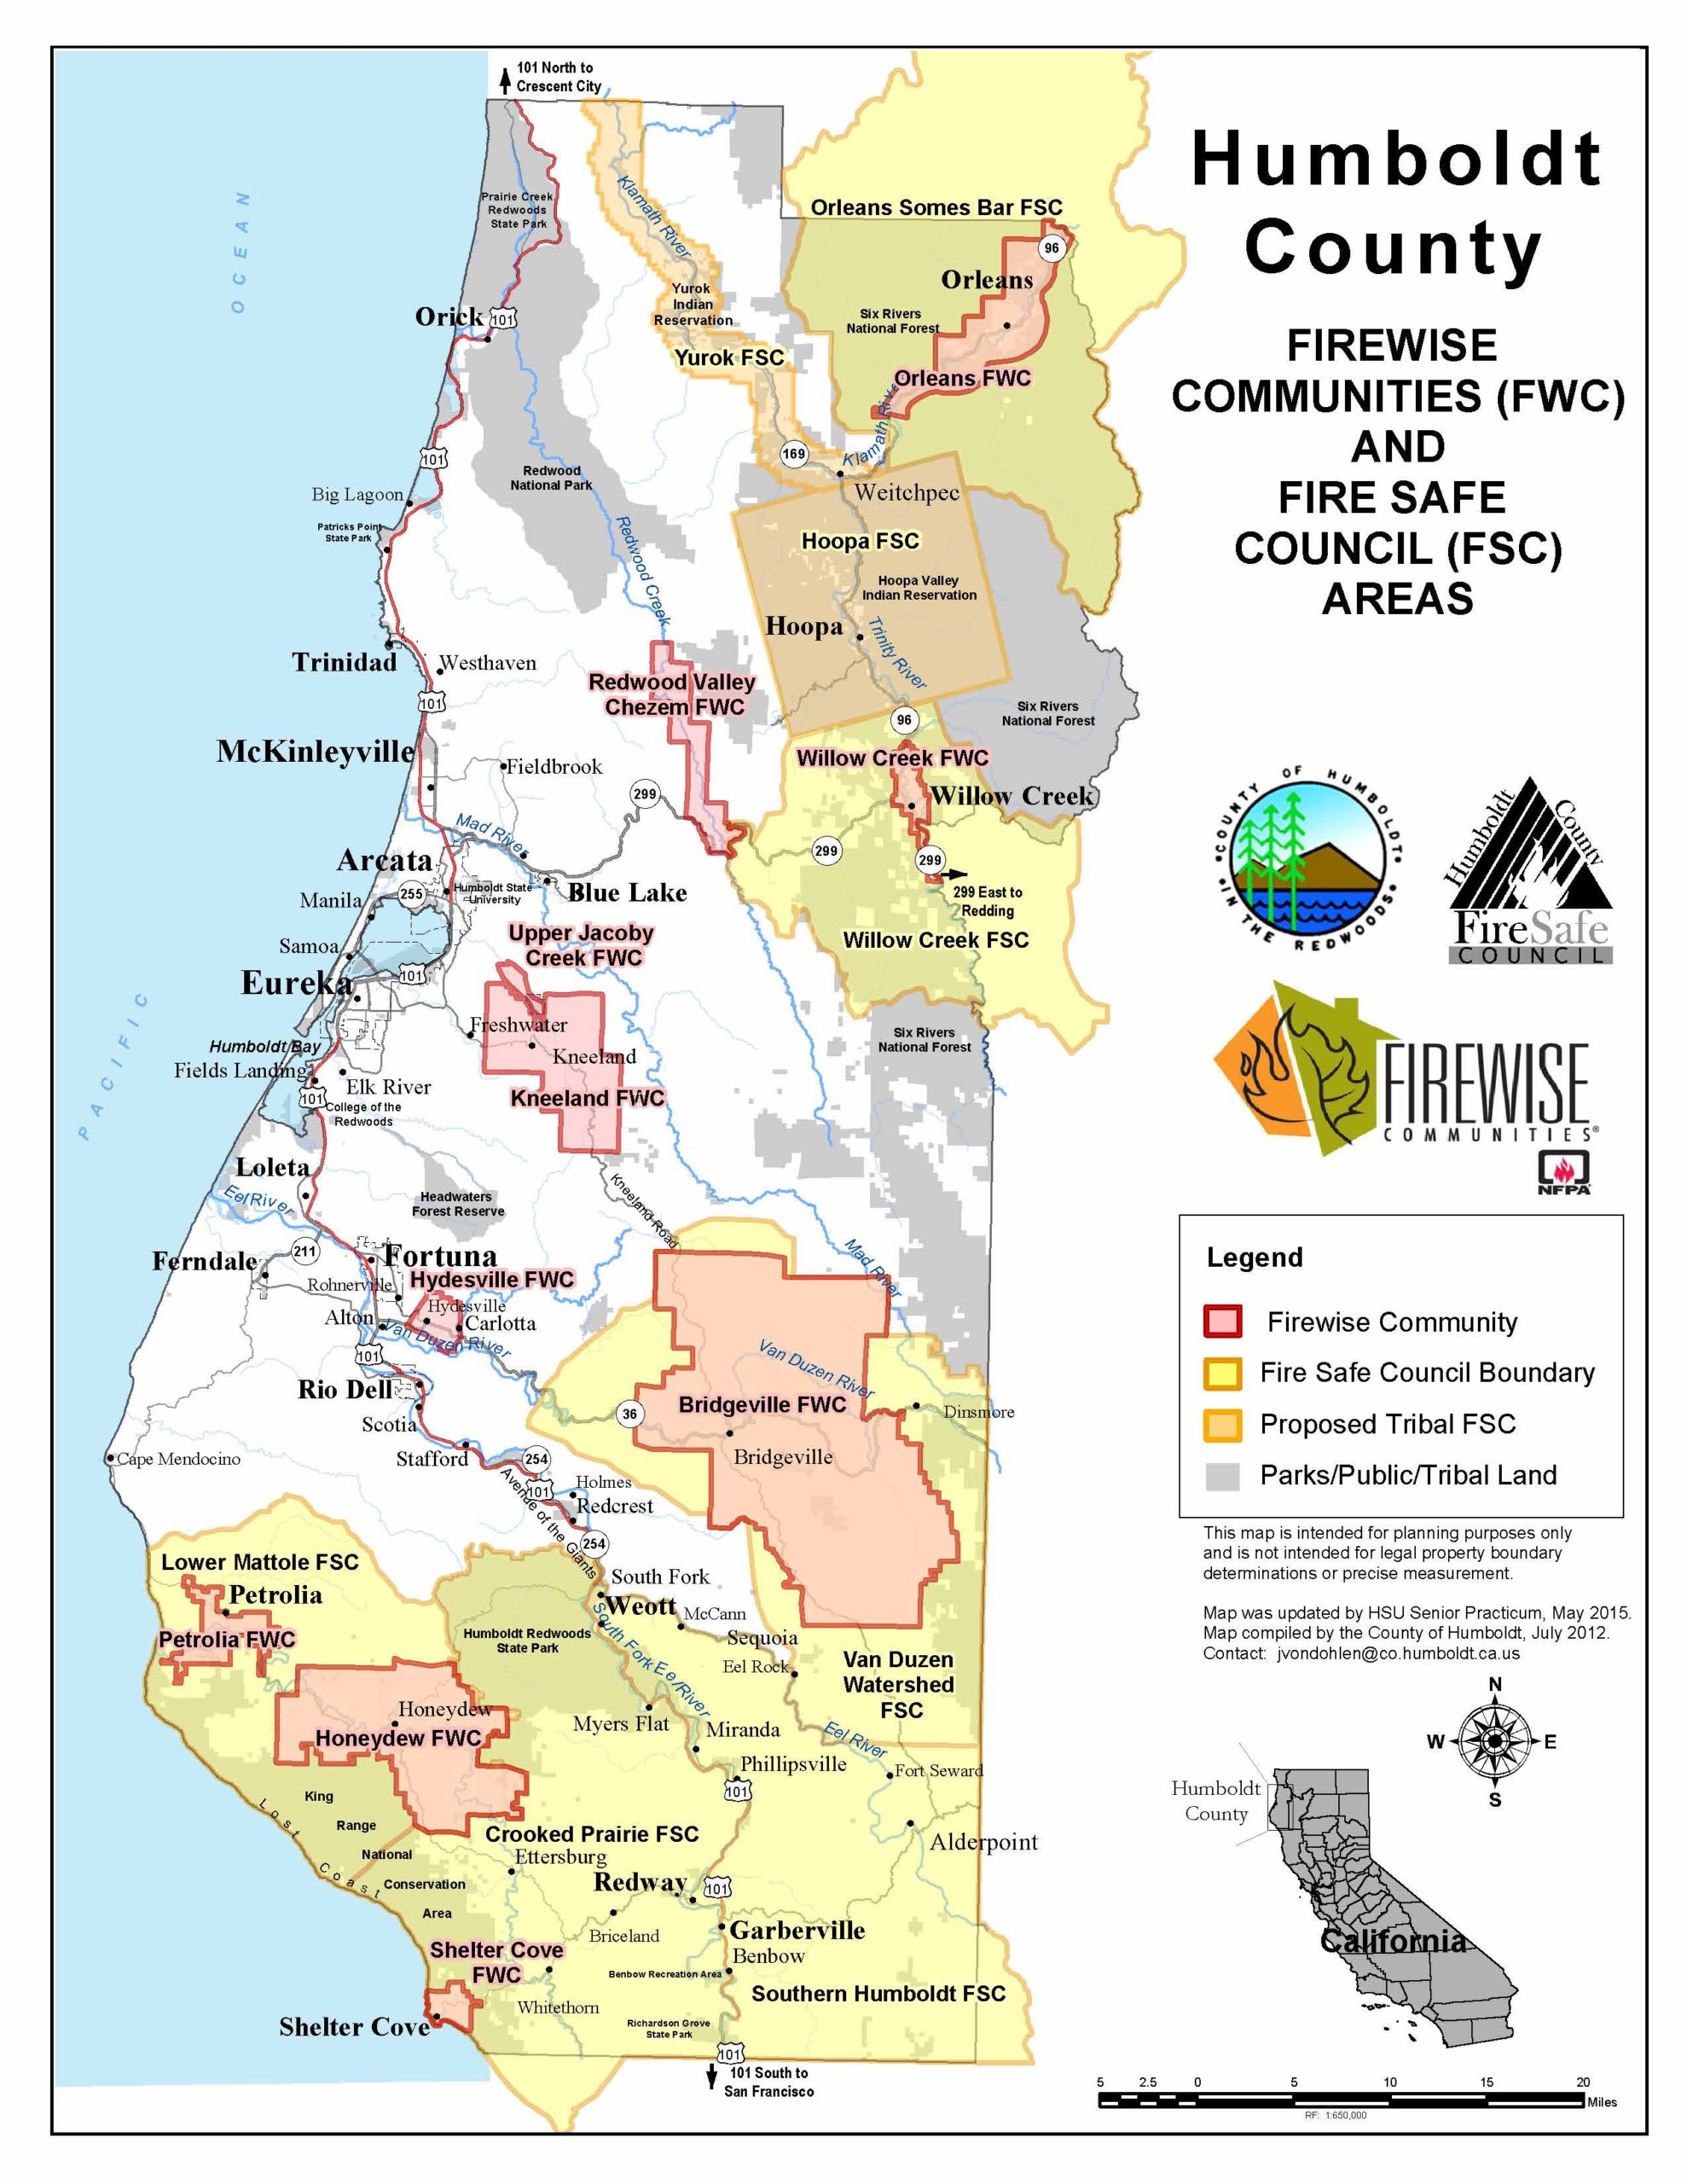 Humboldt County Firewise Map by Jerry Dinzes - 2015